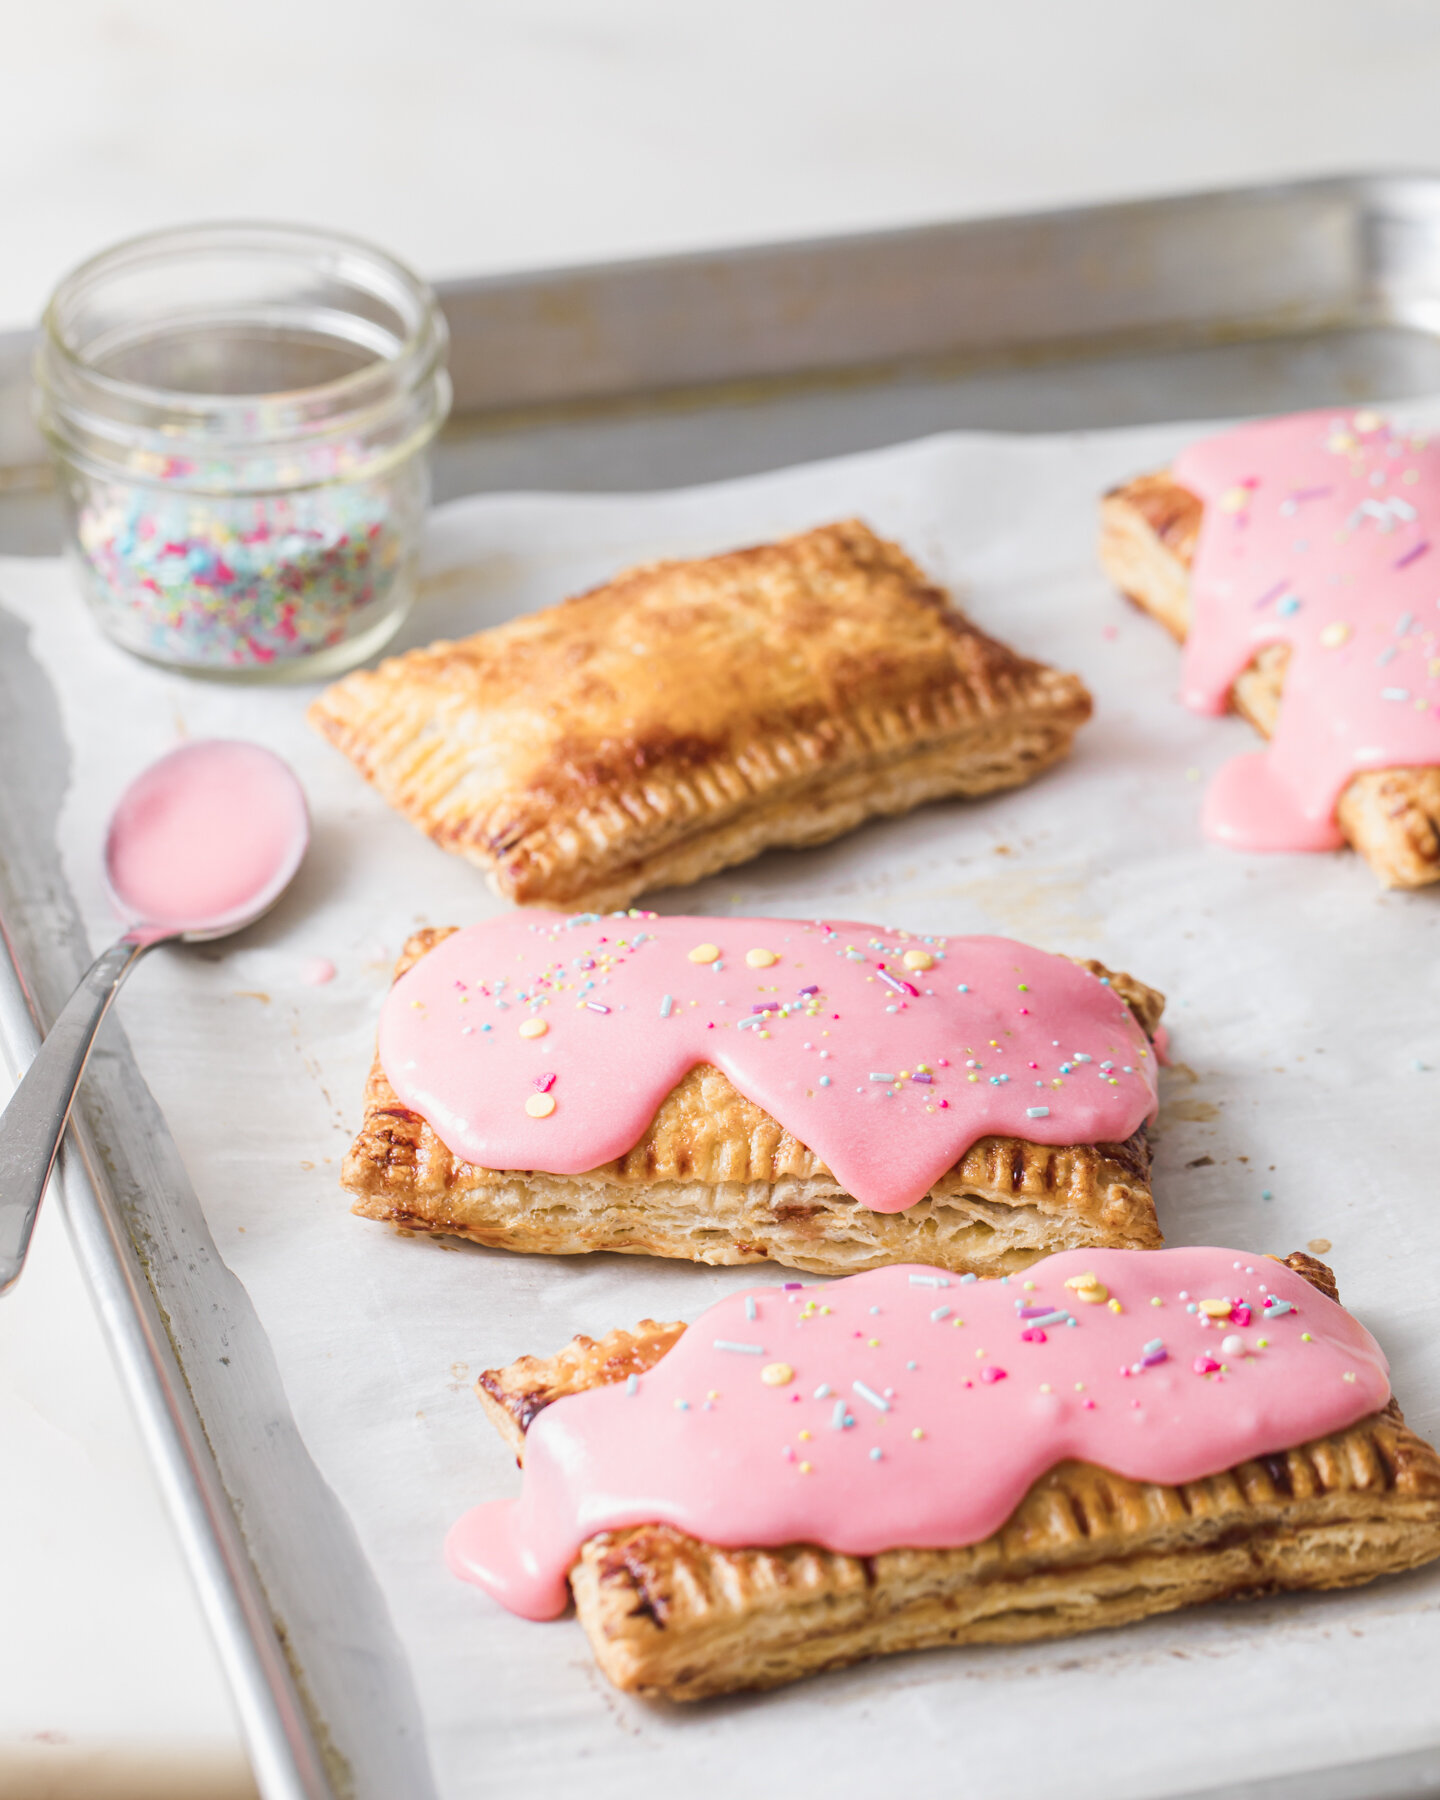 Dripping pink glaze with spinkles on top of homemade strawberry pop tarts on a baking sheet.